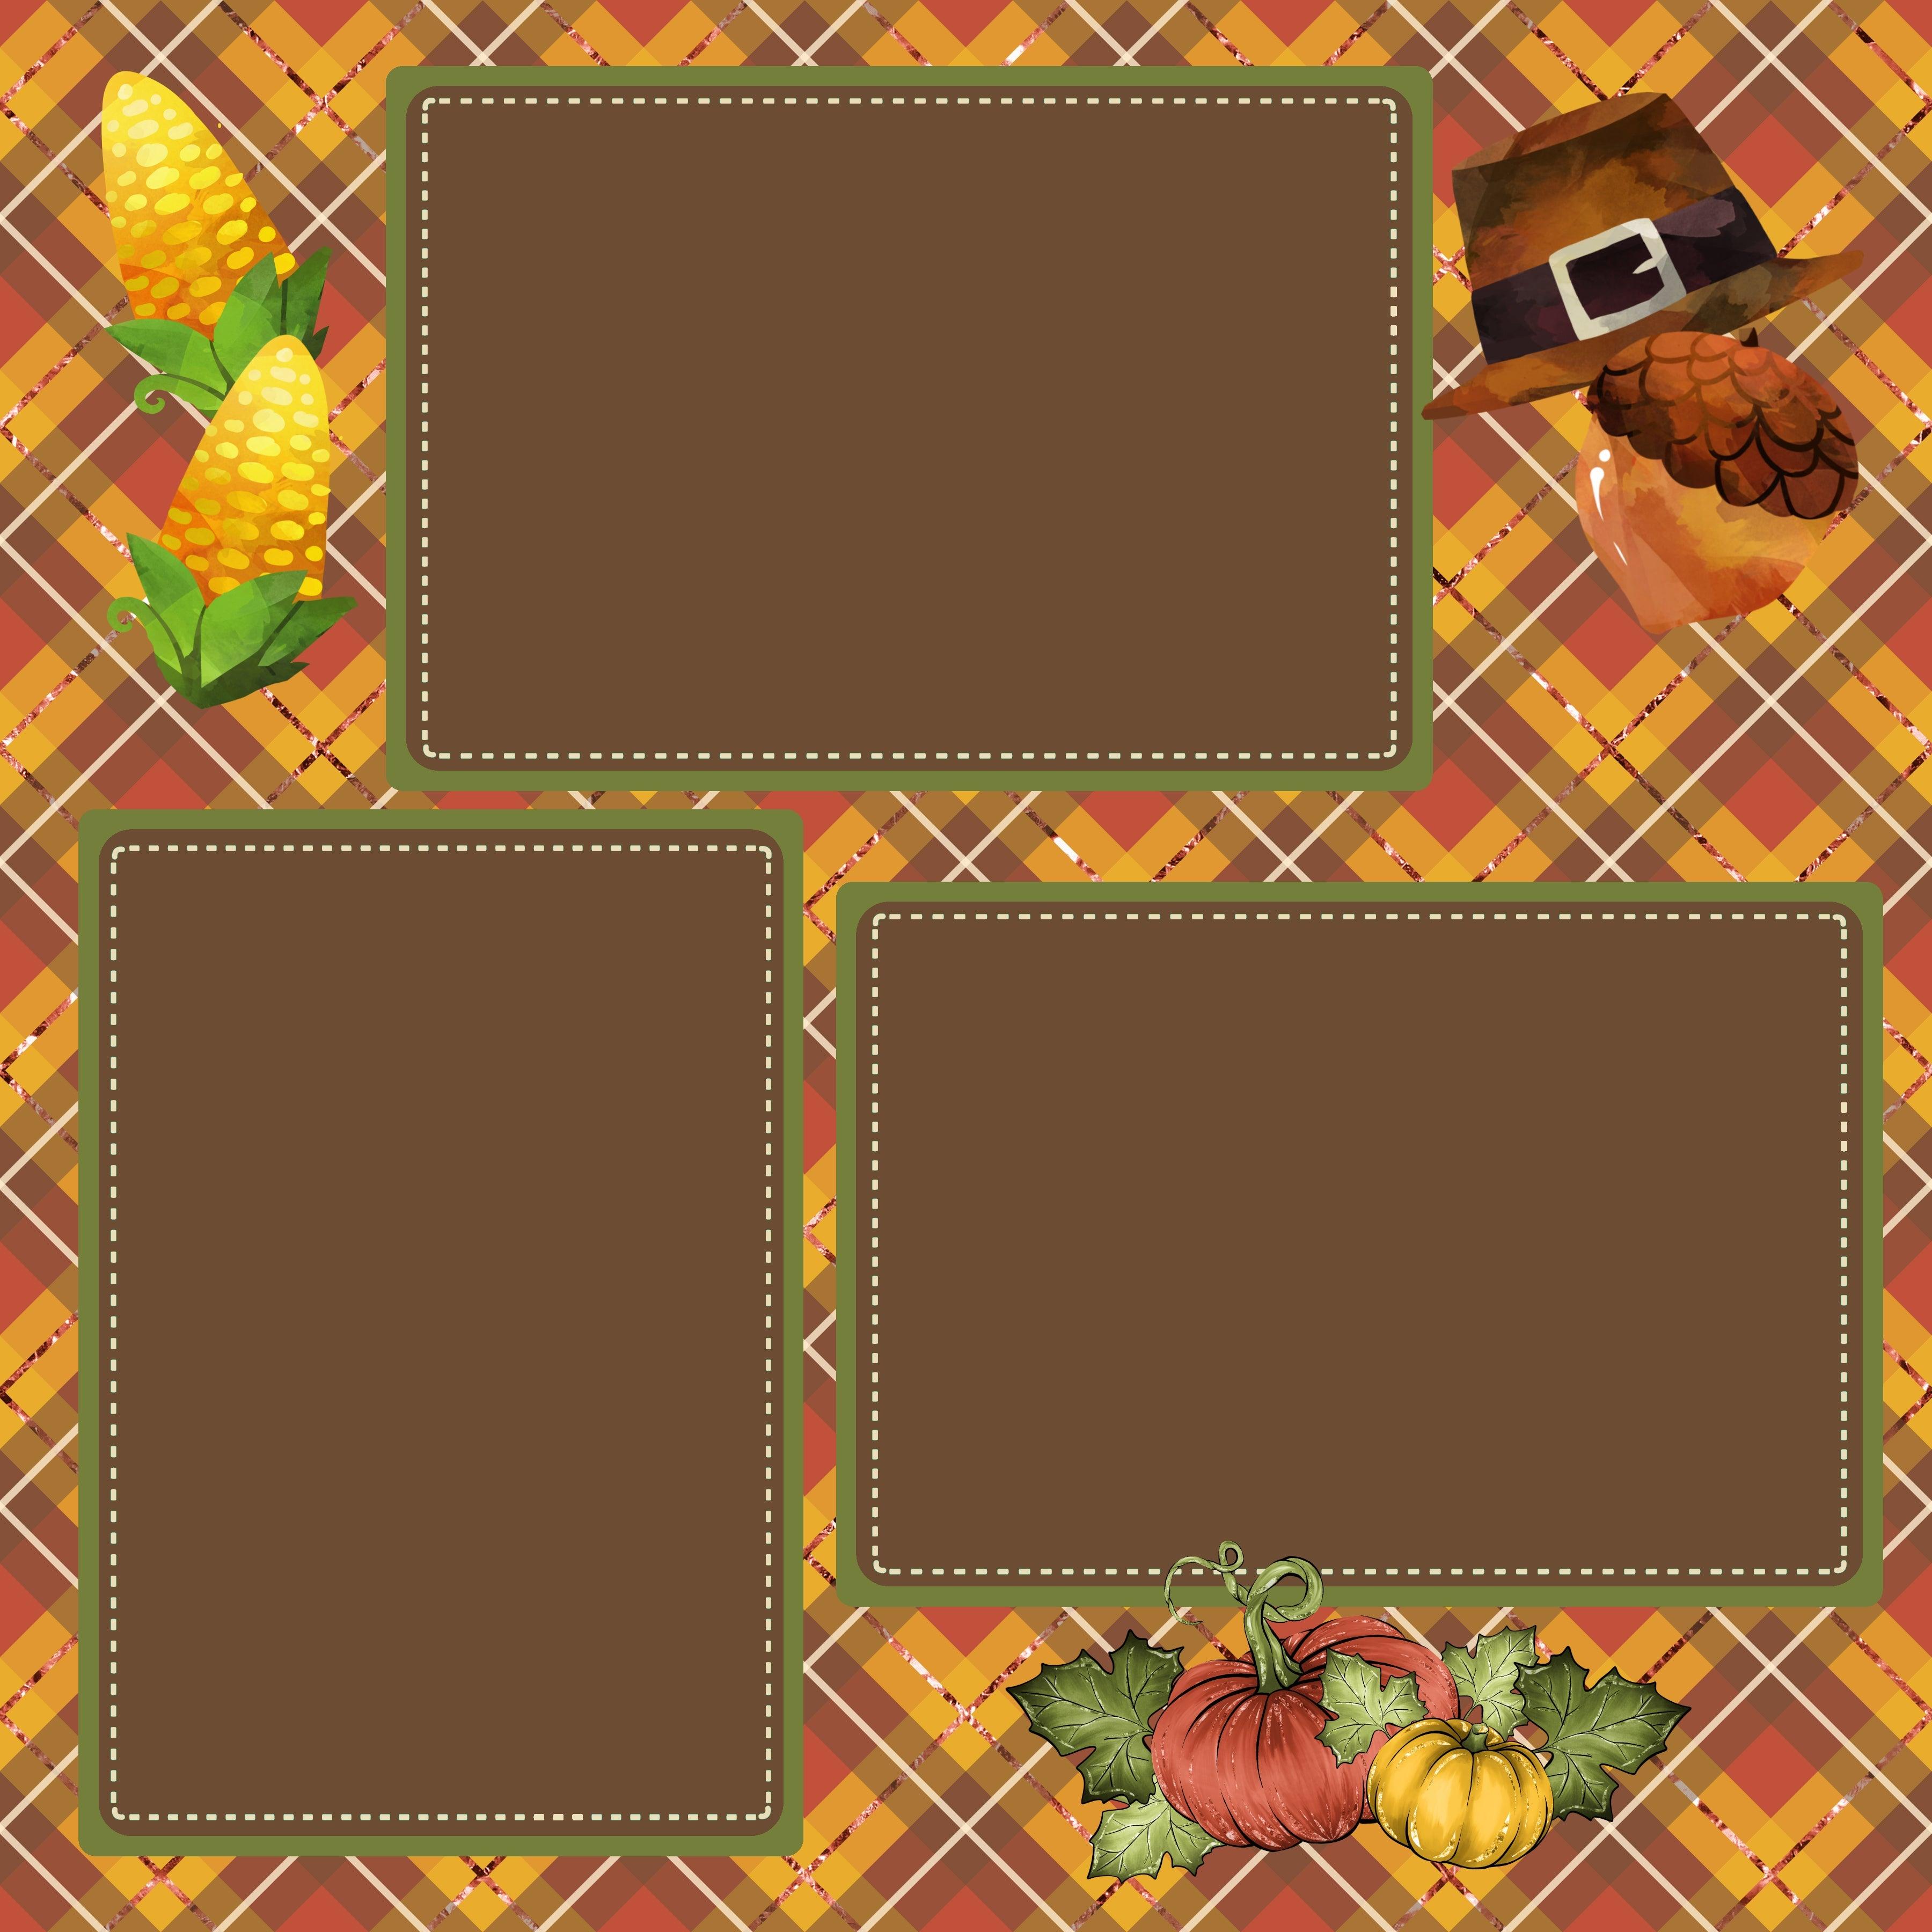 Always Something To Be Thankful For Thanksgiving (2) - 12 x 12 Premade, Printed Scrapbook Pages by SSC Designs - Scrapbook Supply Companies